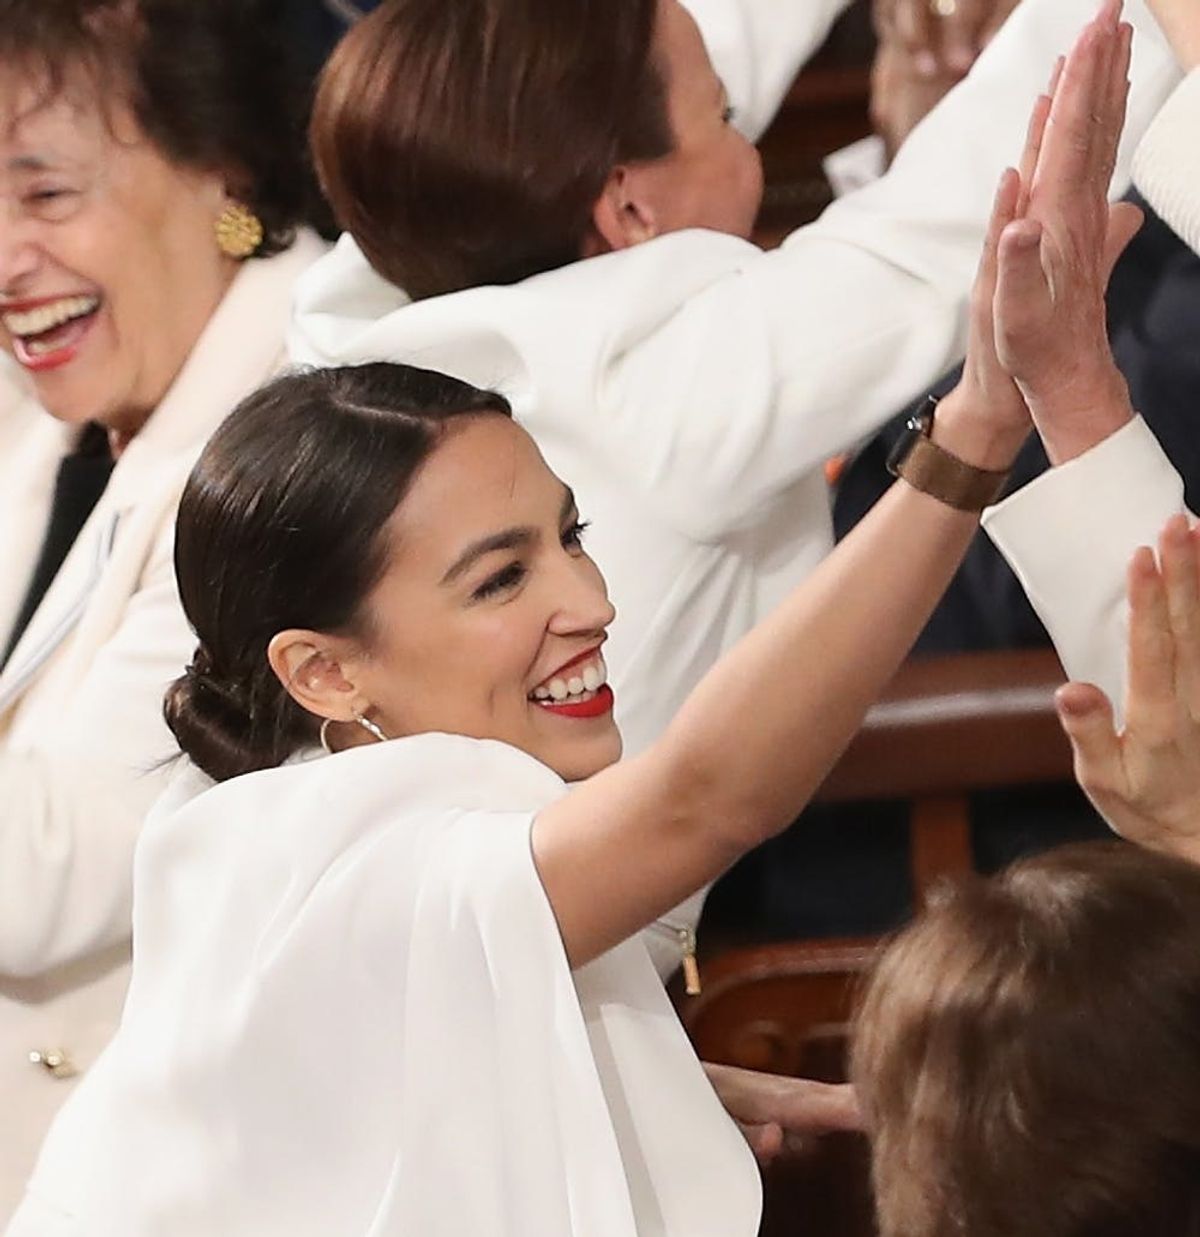 The Real Reason Why Women Wore White to the State of the Union